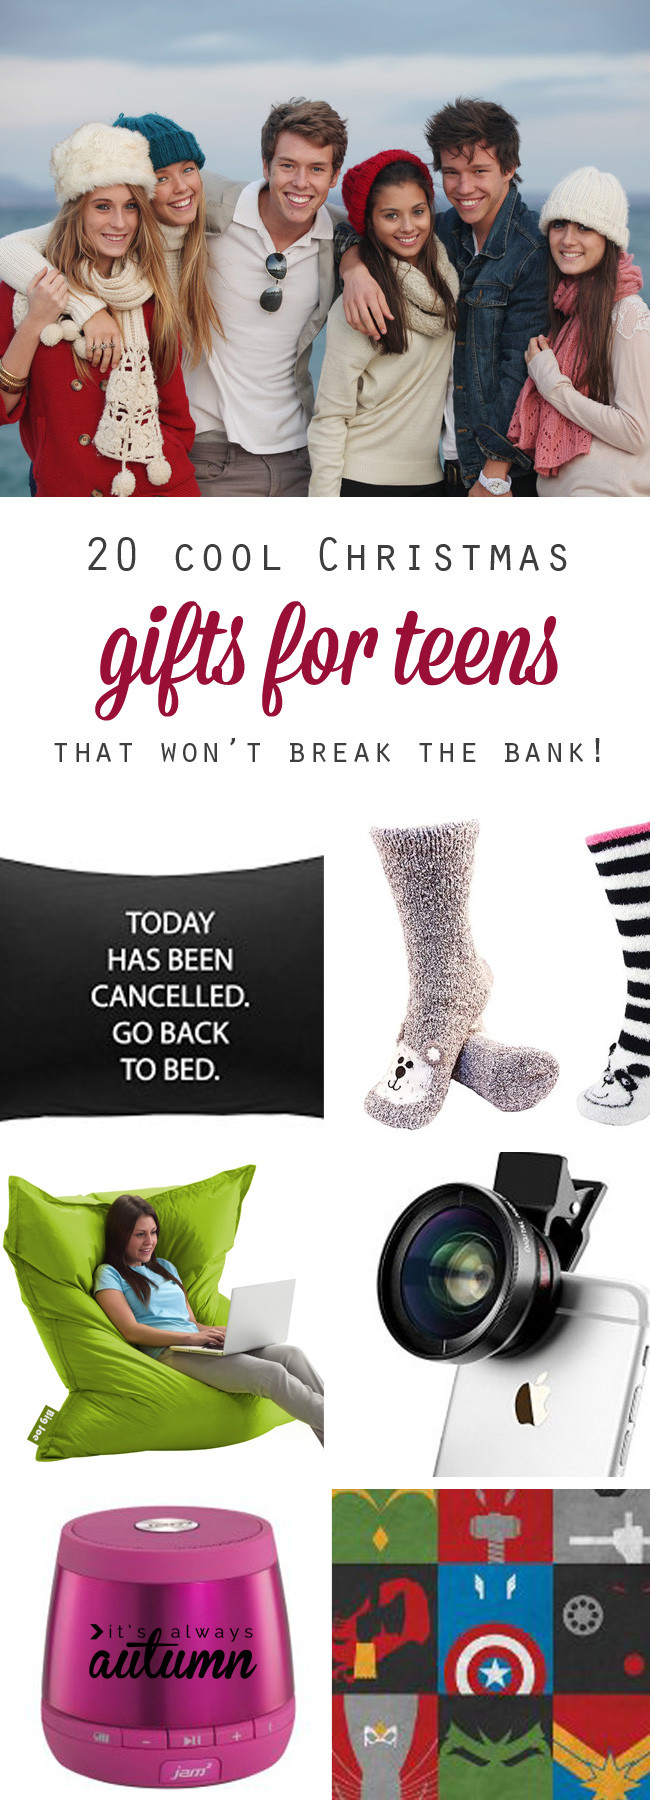 Gift Card Ideas For Girls
 best Christmas t ideas for teens It s Always Autumn